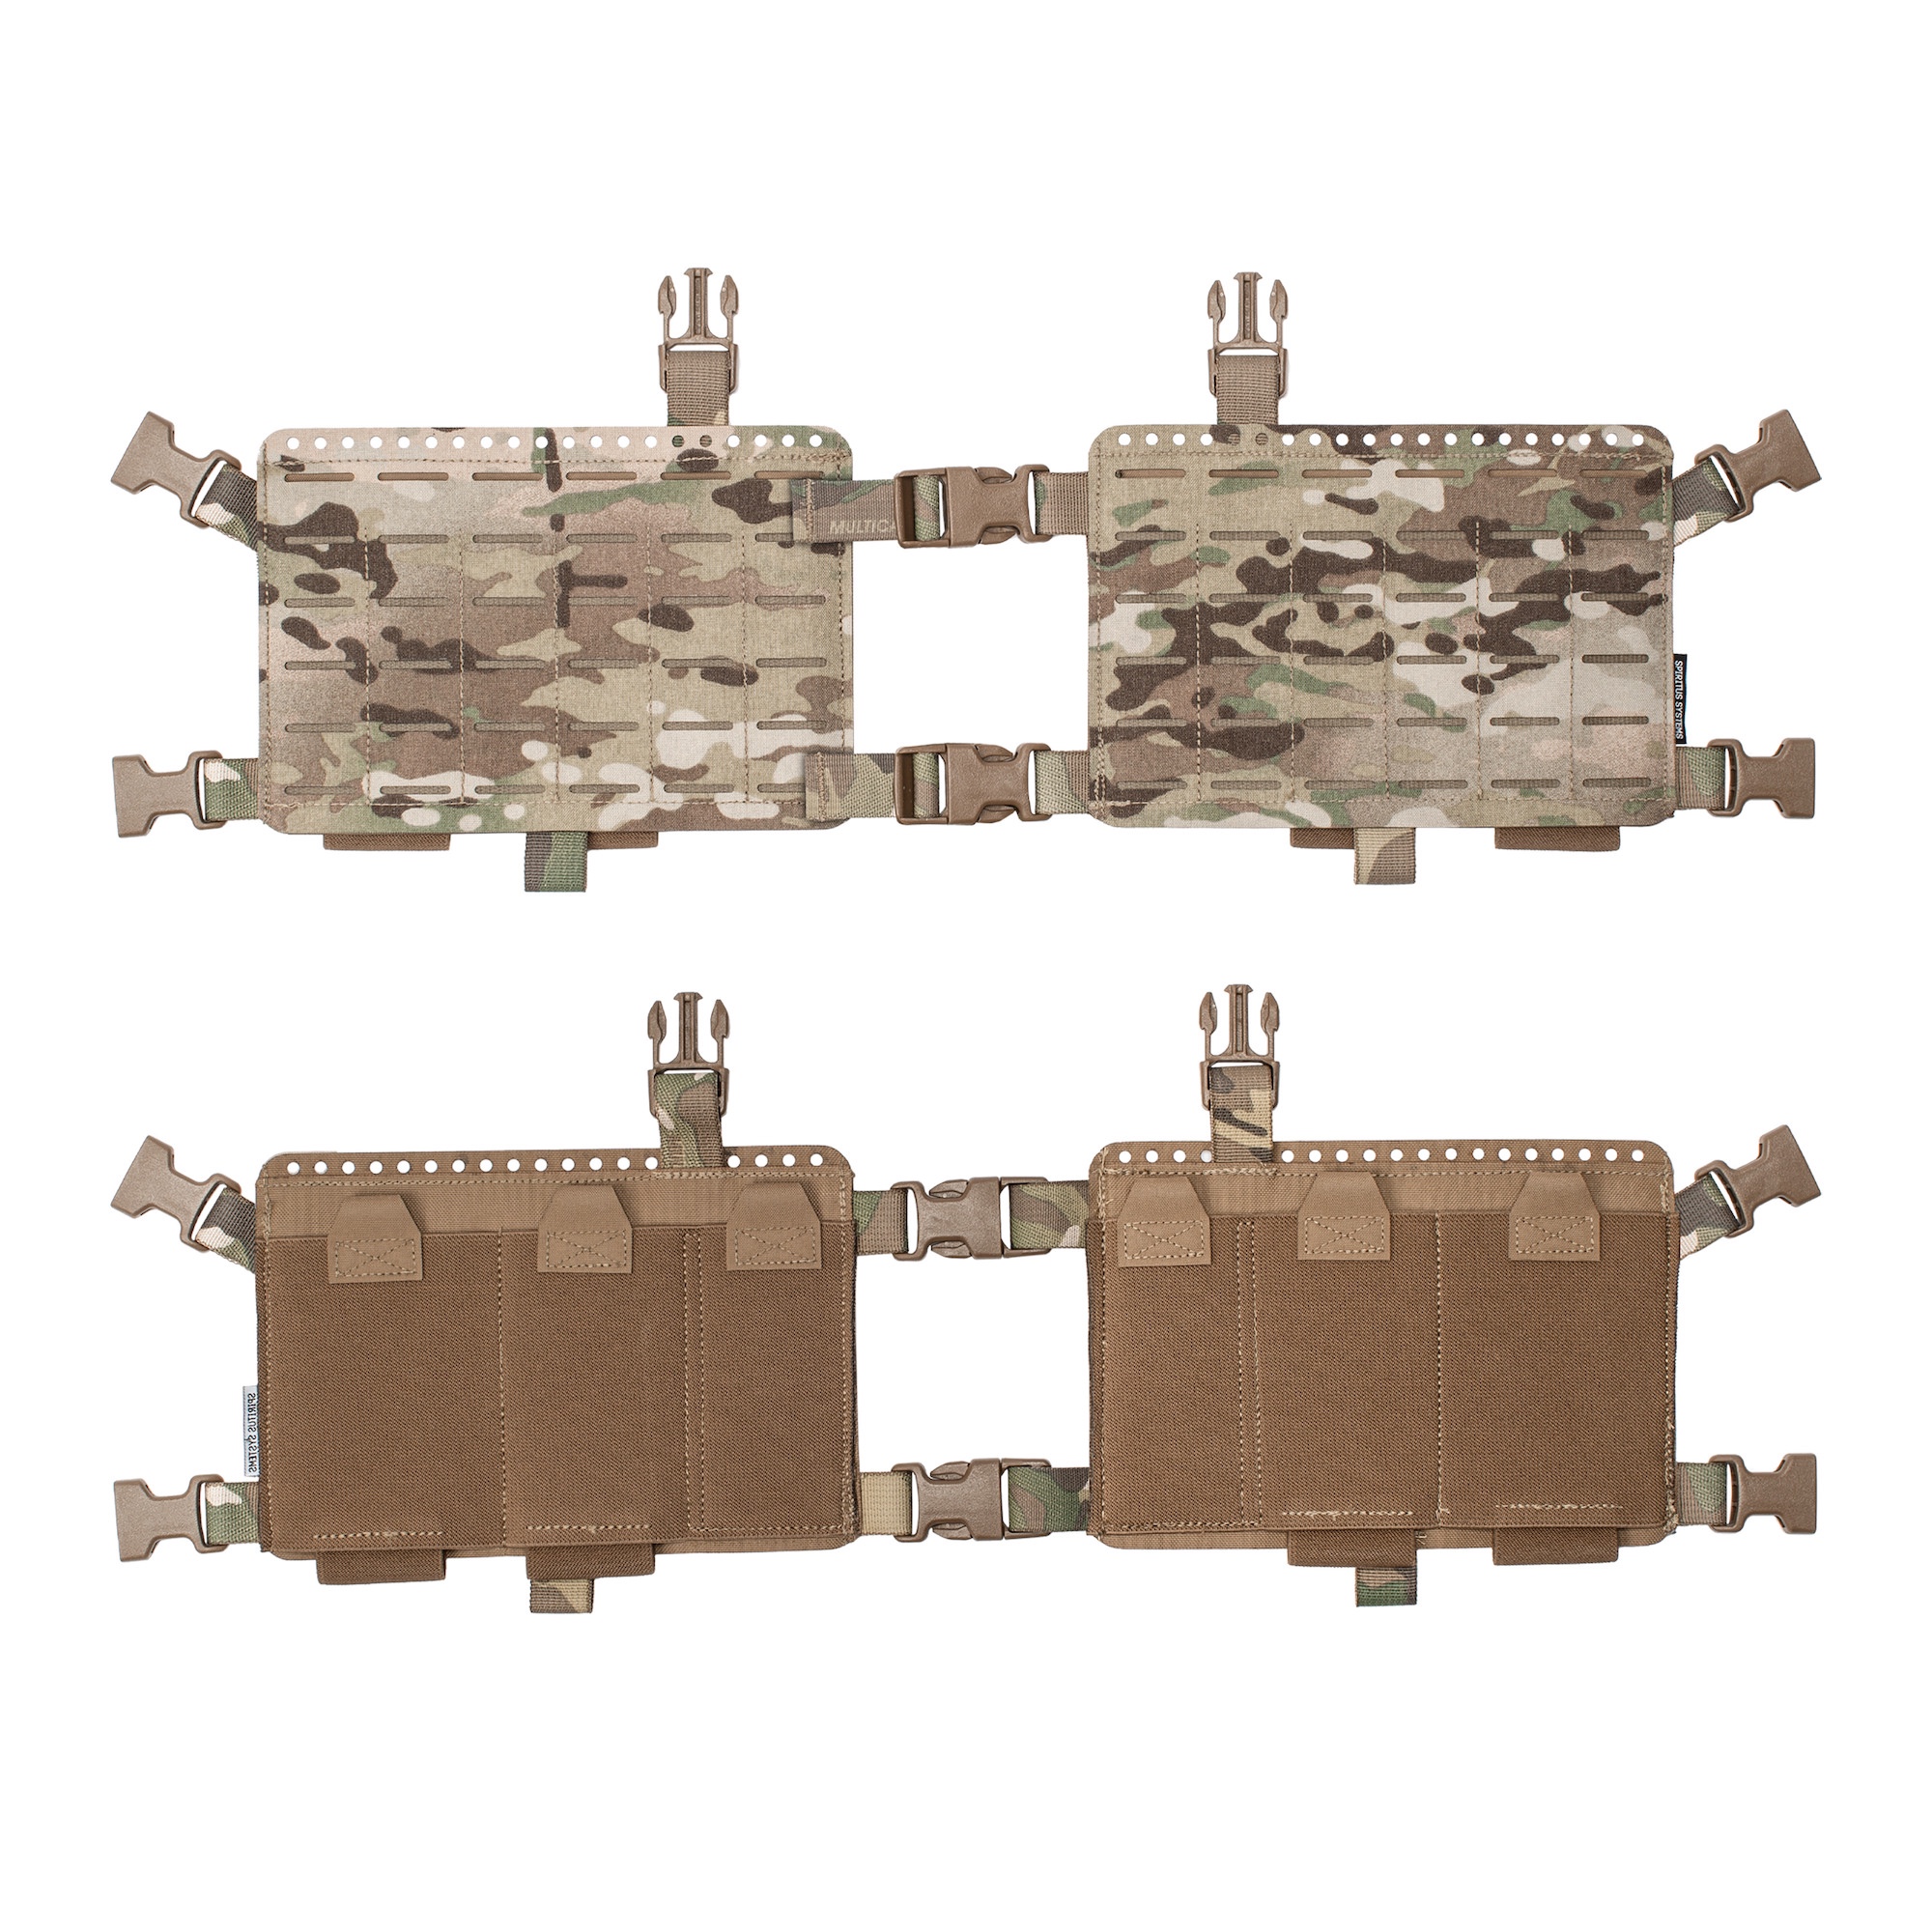 Spiritus Systems Releases the 34 Alpha Split Chest Rig Chassis 